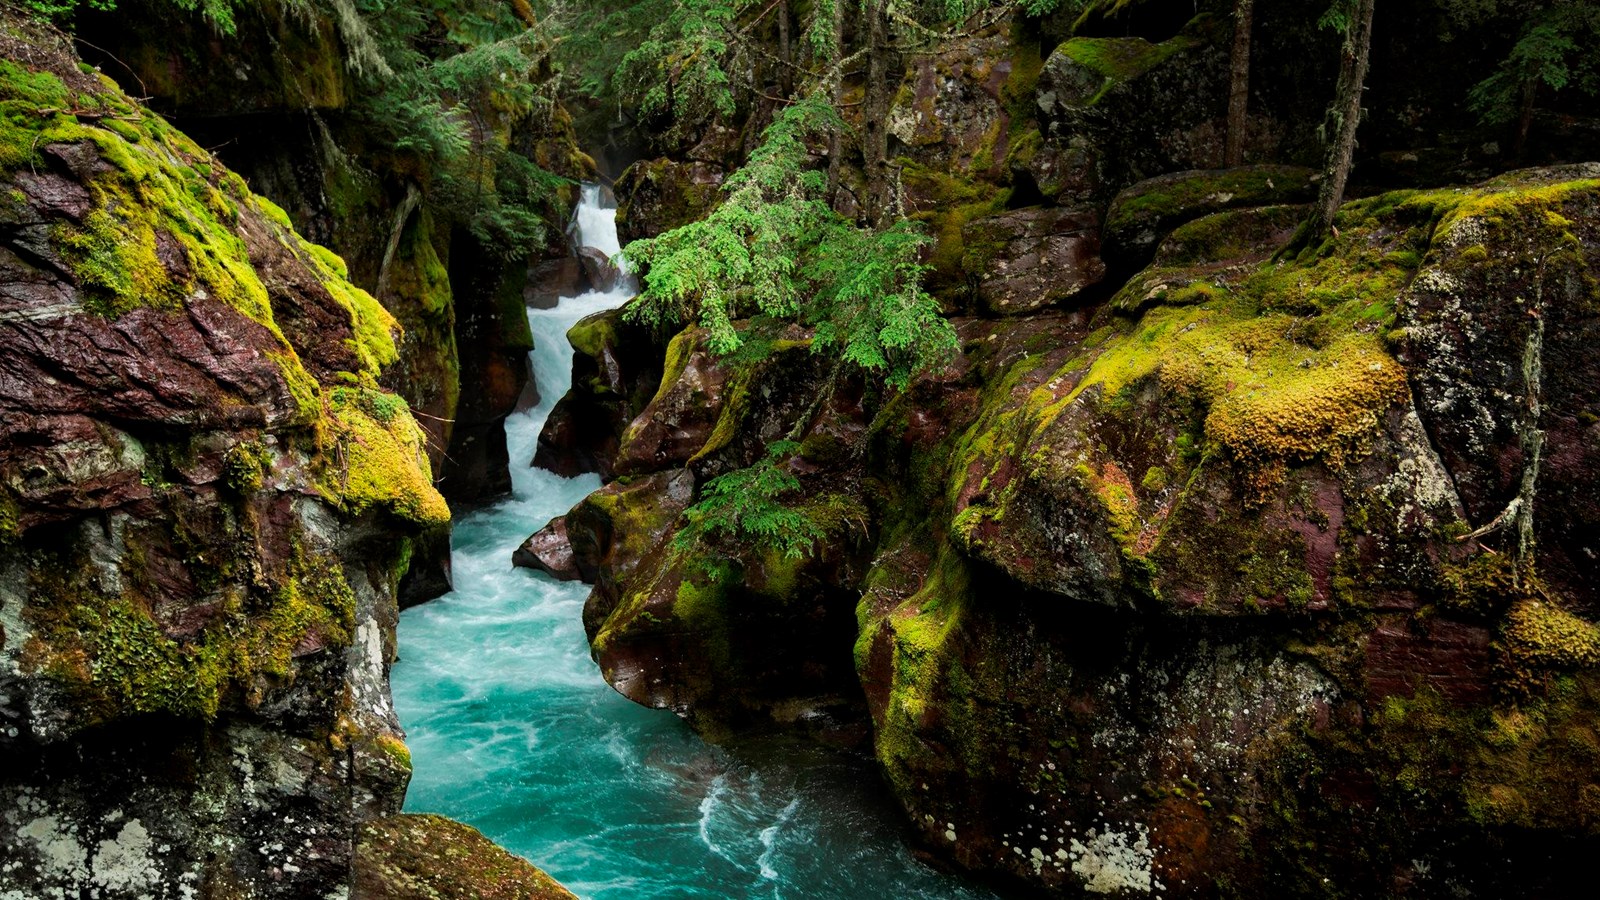 Blue water rushing through a gorge carved out of moss-covered red rock.